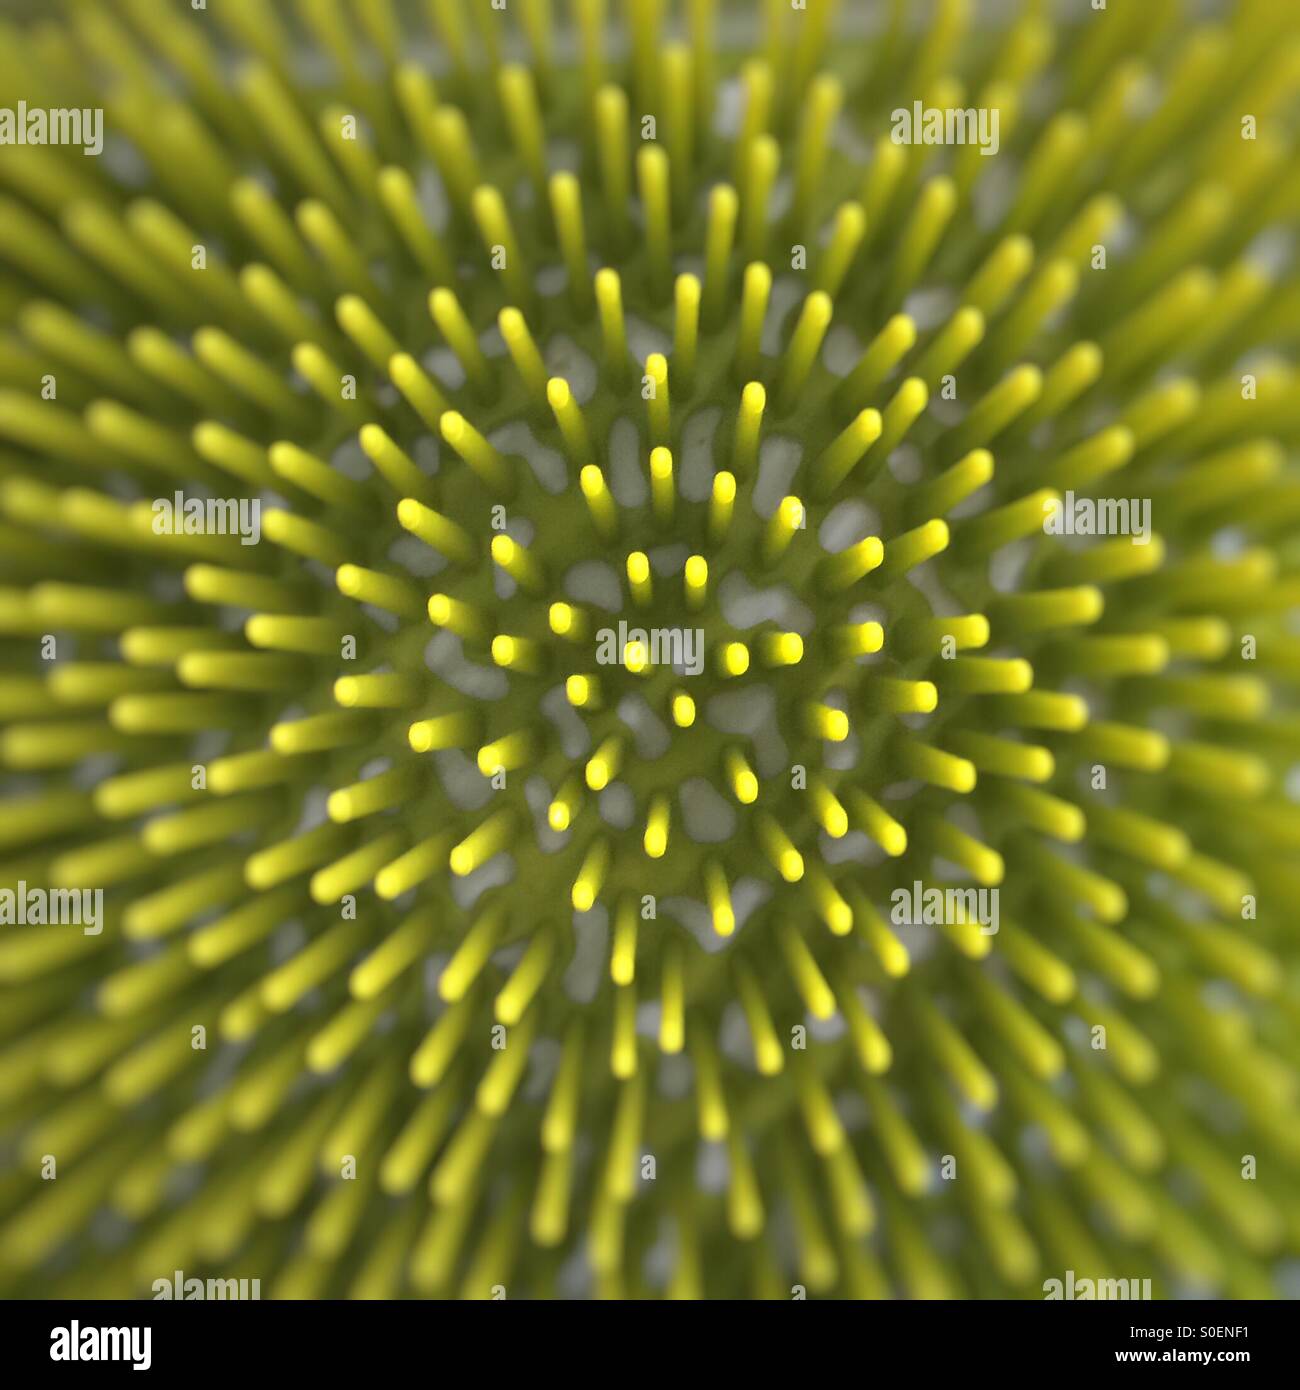 An abstract image of lime green spikes emanating from a central point, blurred on the edges. Stock Photo